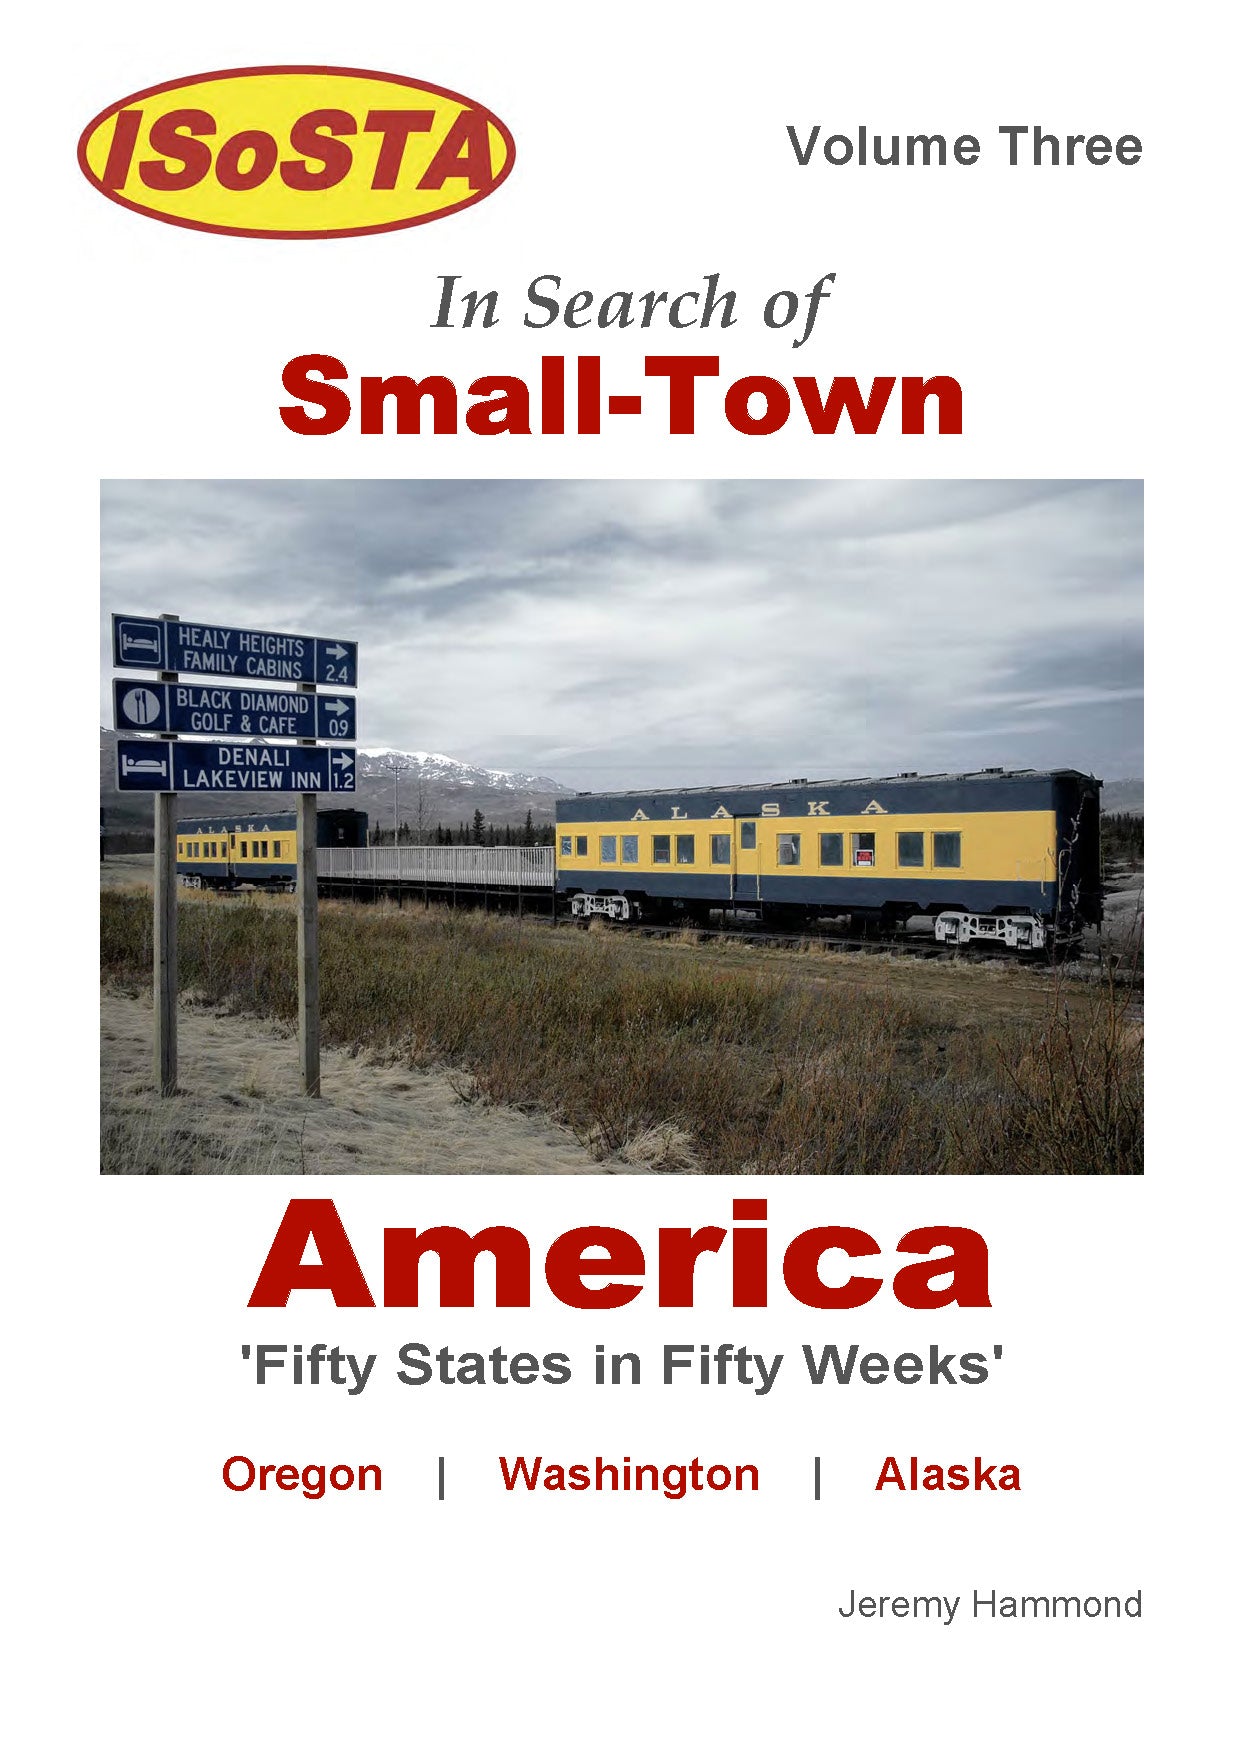 In Search of Small-Town America: Volume 3